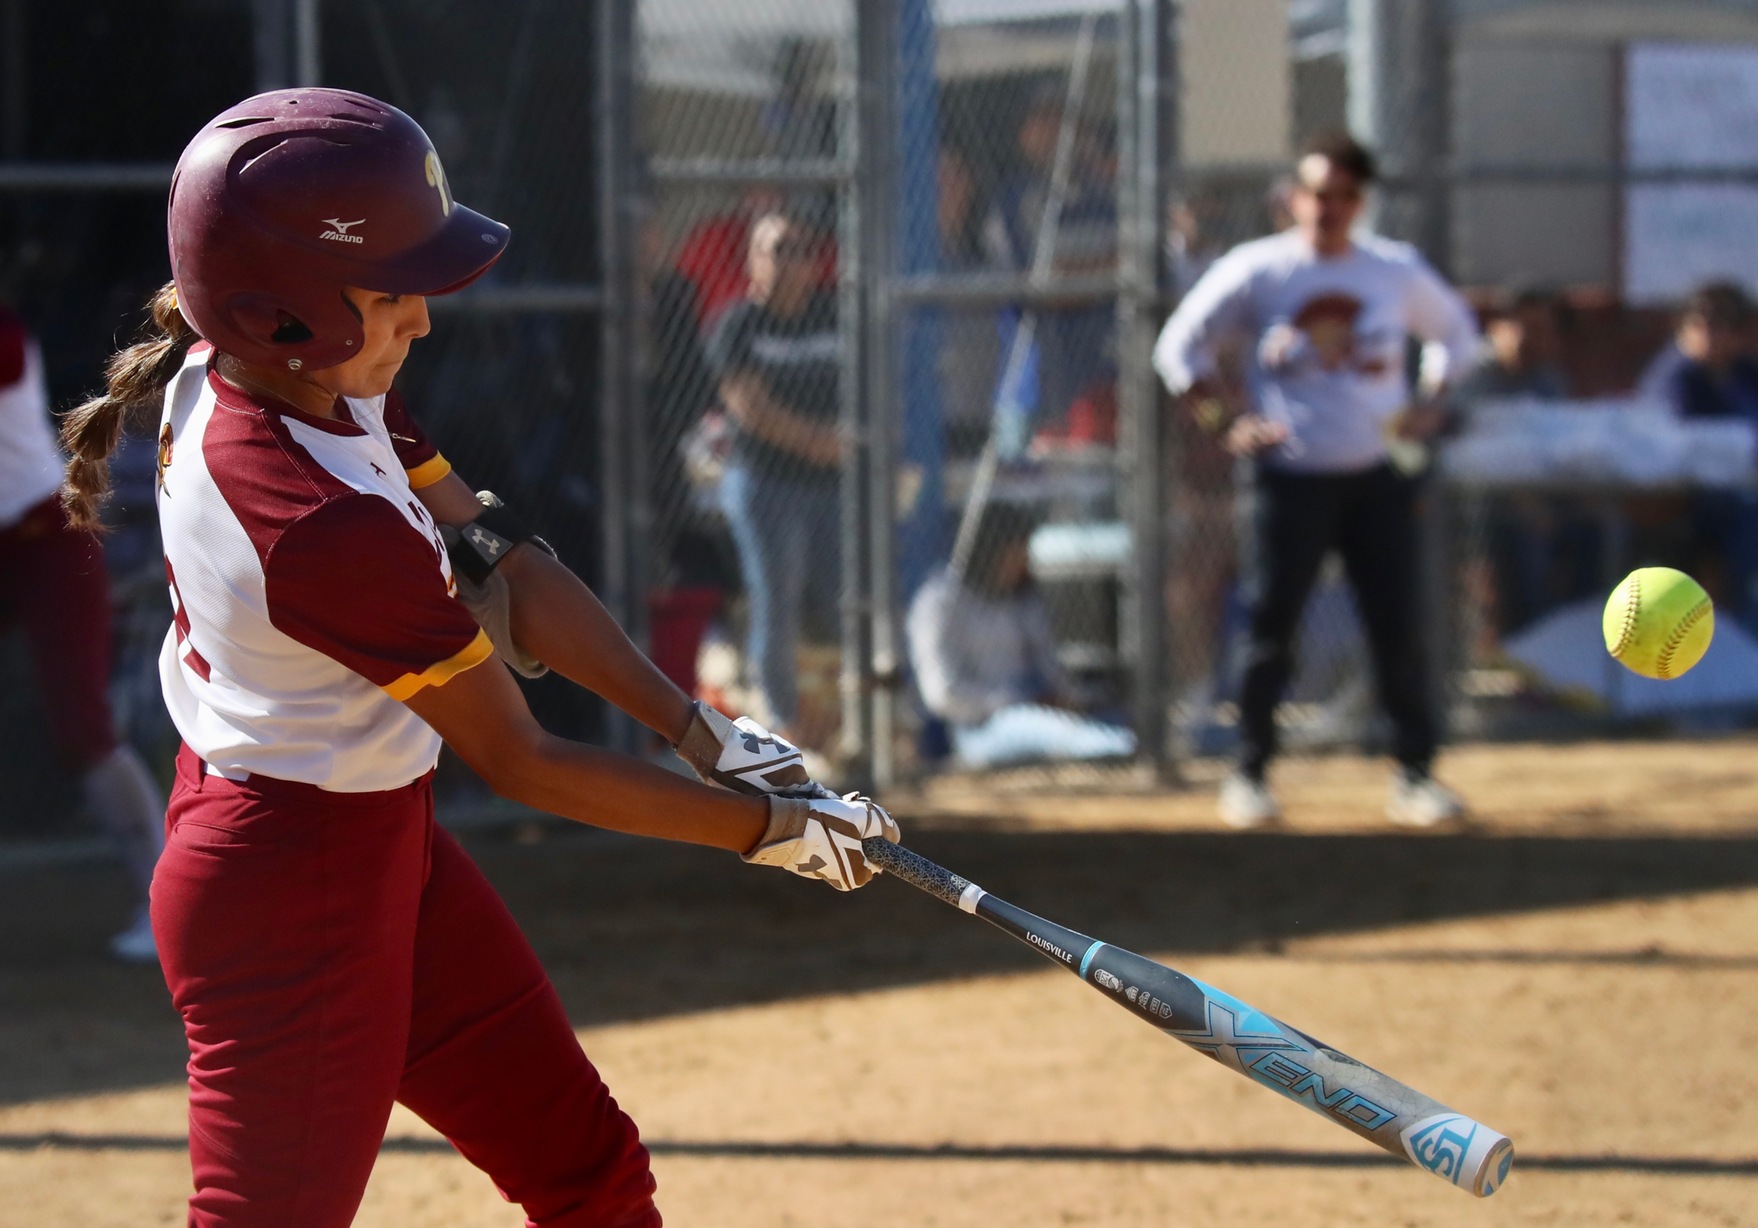 Samantha Diaz connects for a home run in PCC's game on Saturday at Robinson Park, photo by Michael Watkins.